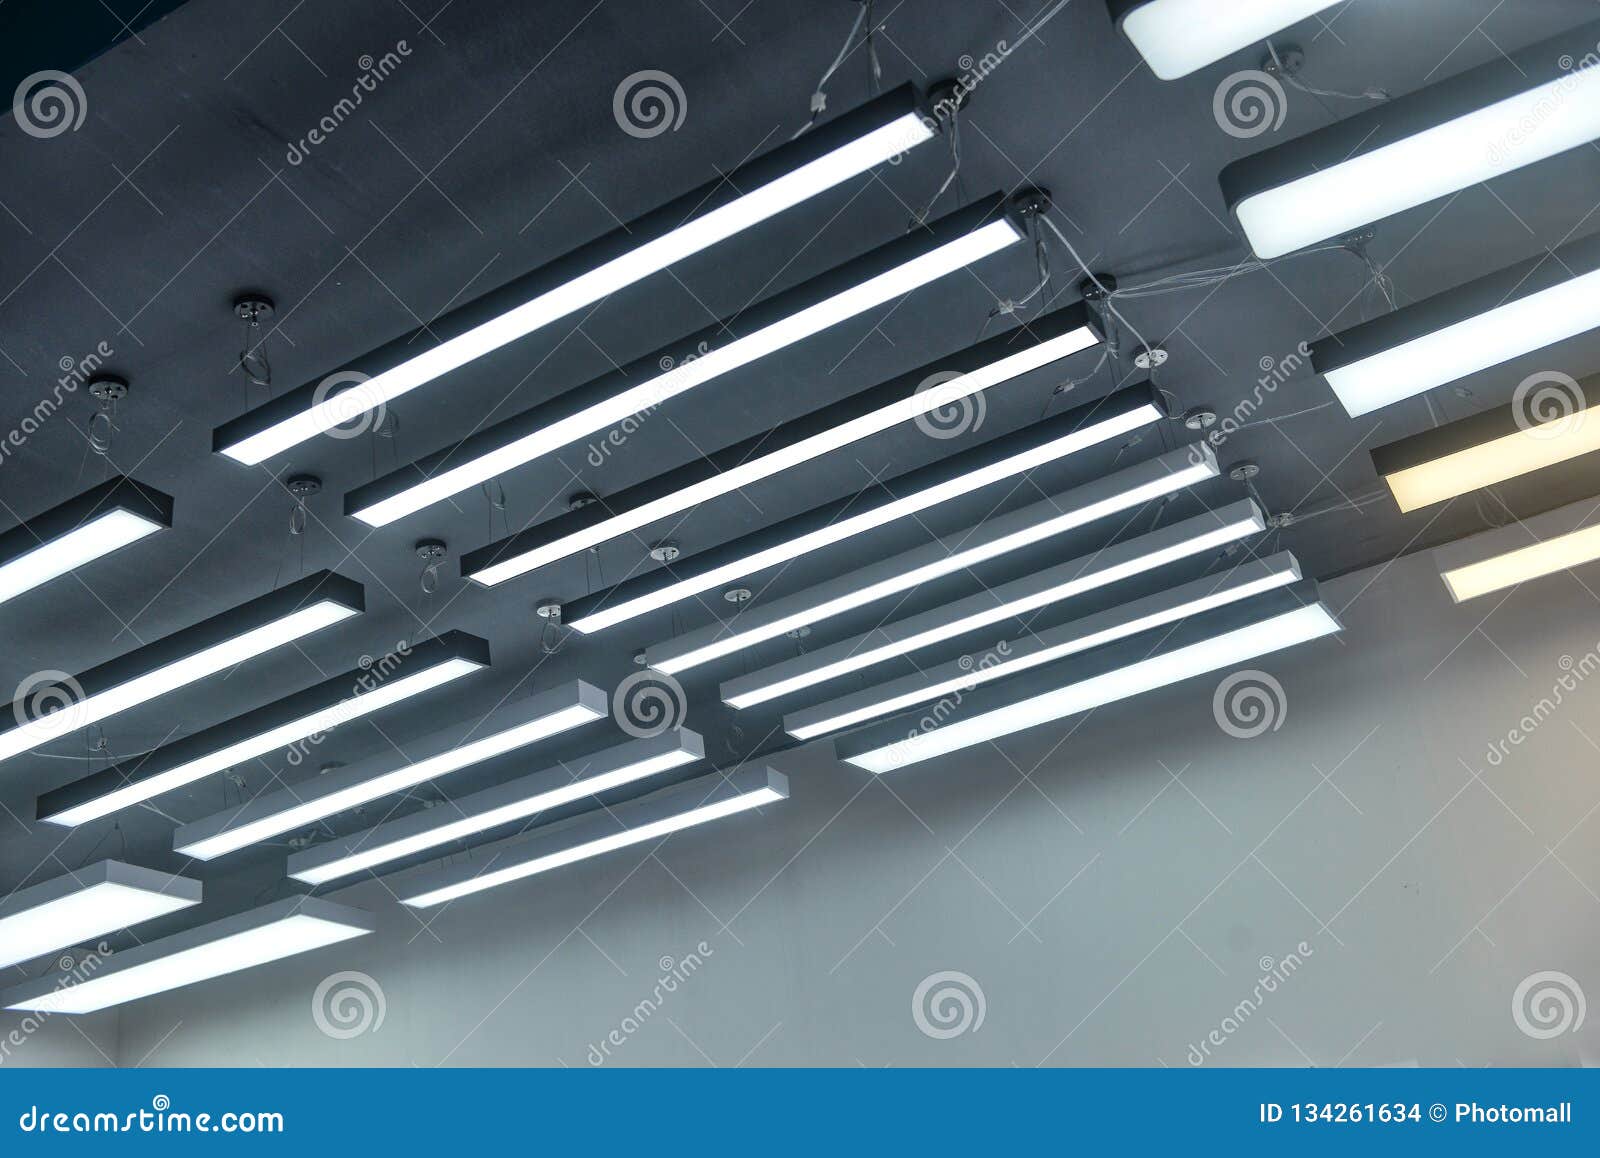 led hanging lighting in commercial building